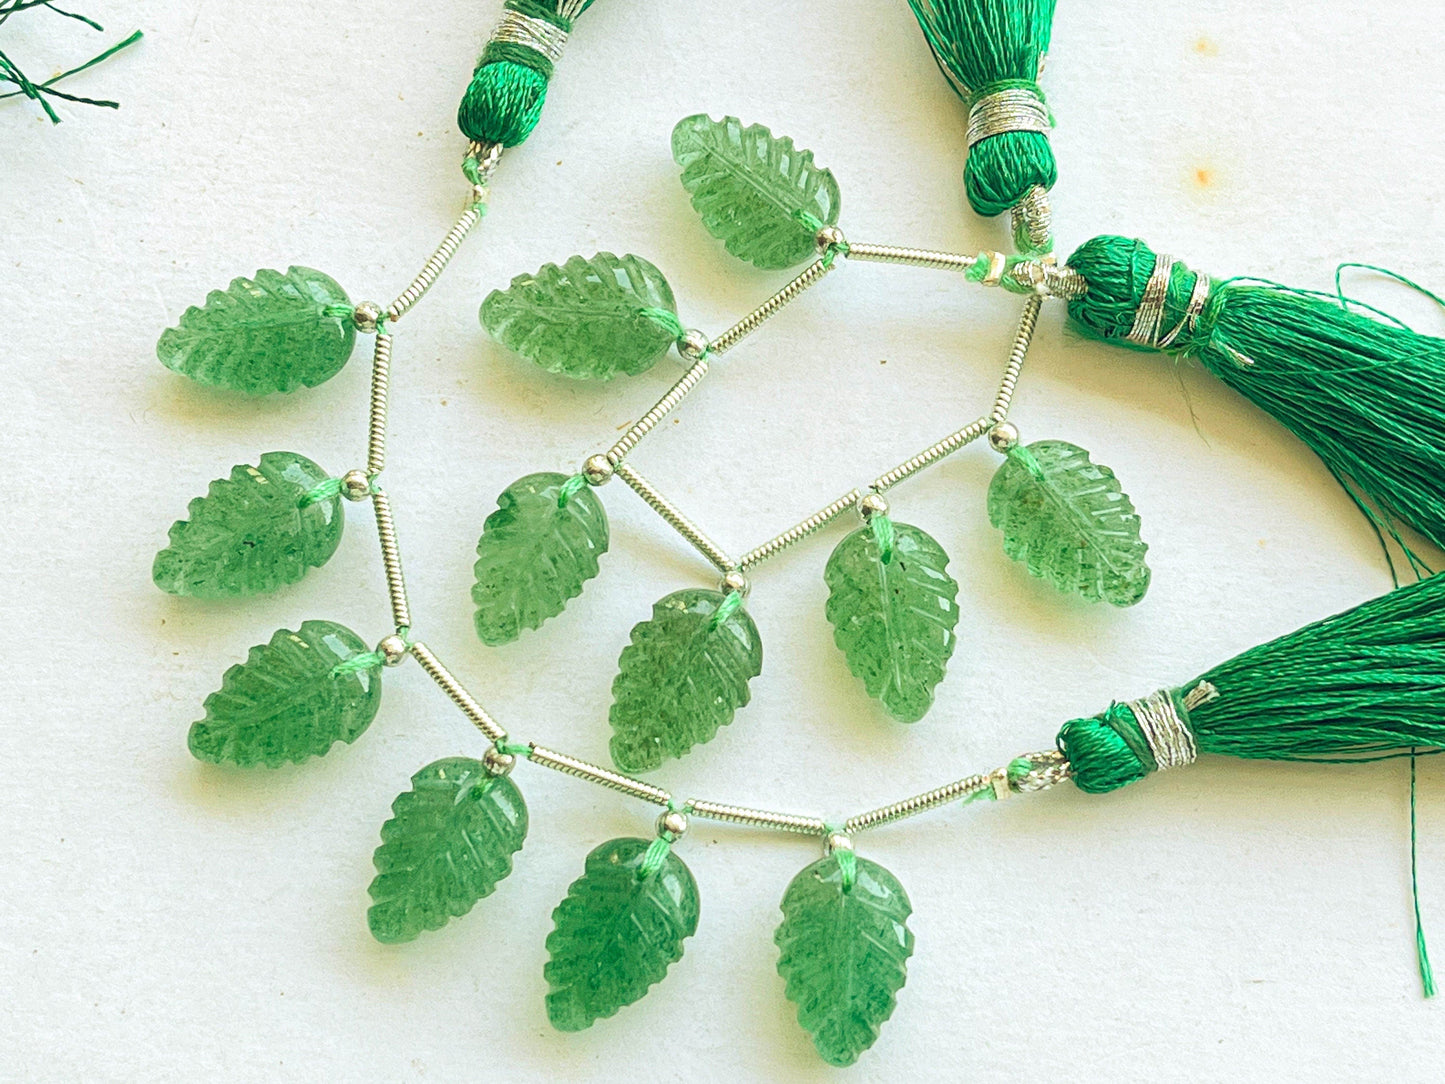 10 Pieces Green Strawberry Quartz Leaf carved Beads Beadsforyourjewelry